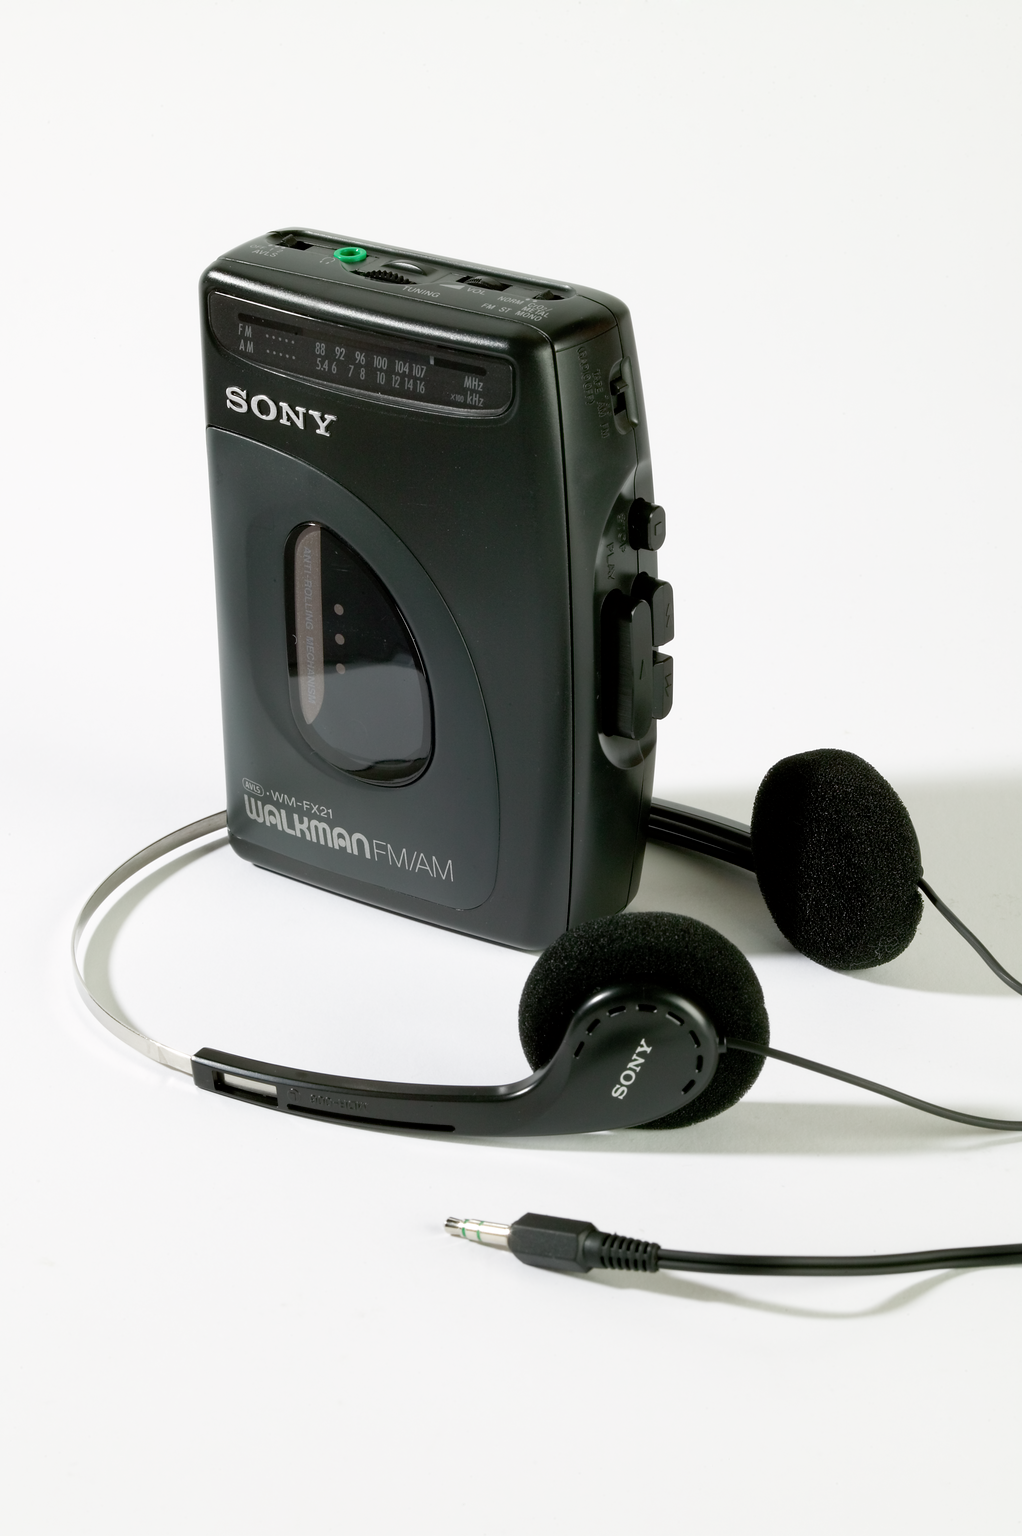 'Walkman' personal cassette player made by the Sony Corporation, Malaysia, 1995.